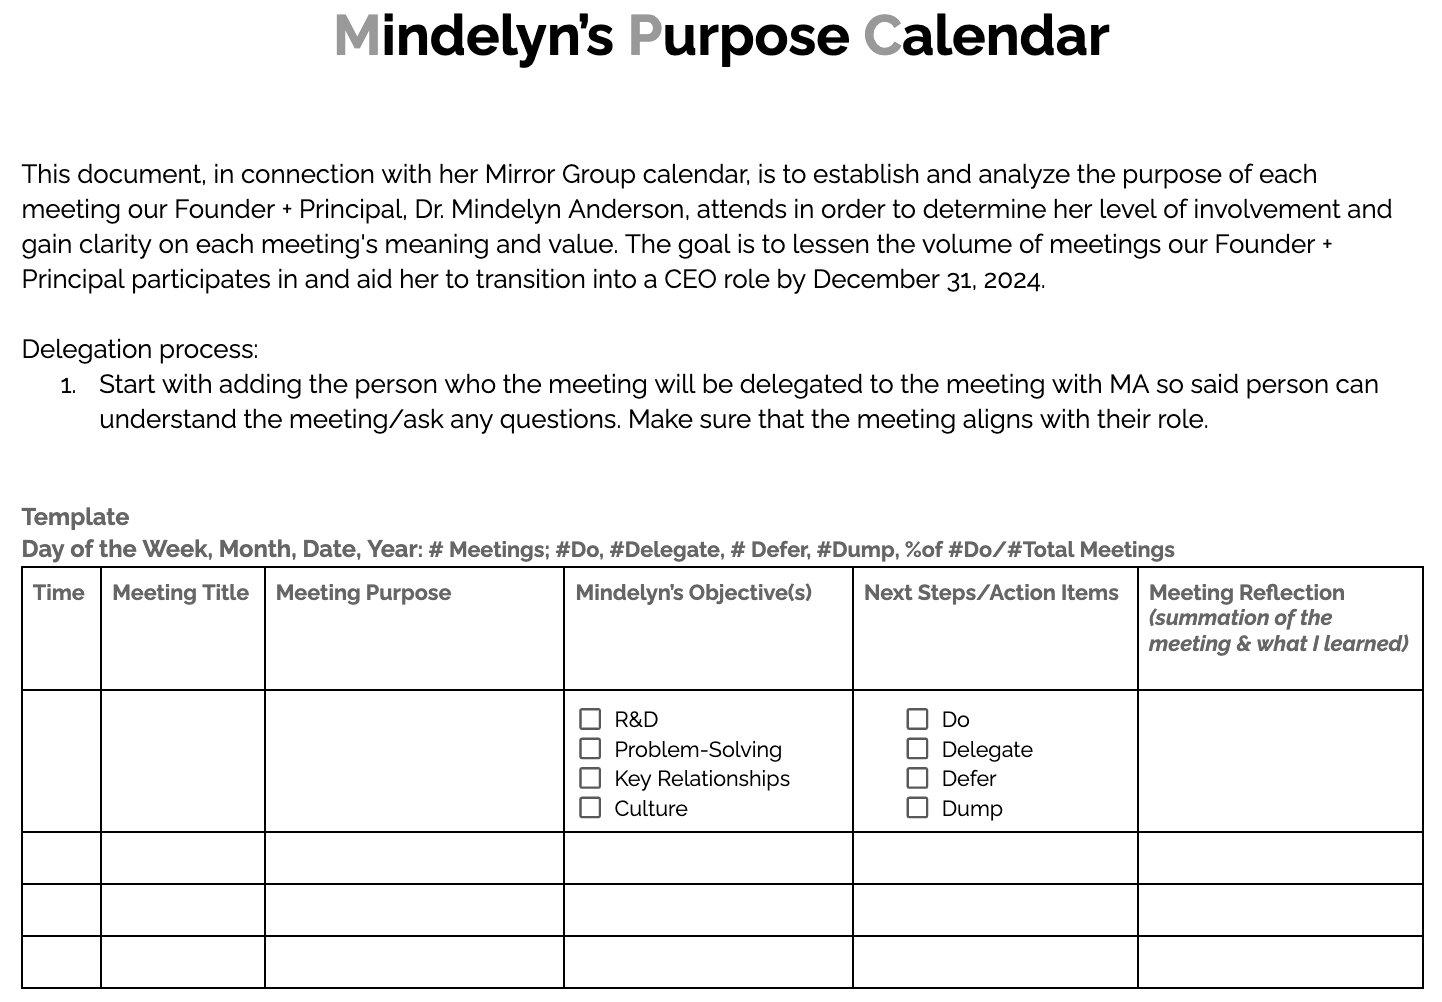 Landscape-oriented table with column headers of “Time”, “Meeting Title”, “Meeting Purpose”, “Mindelyn’s Objectives”, “Next Steps/Action Items”, and “Meeting Reflection”. 